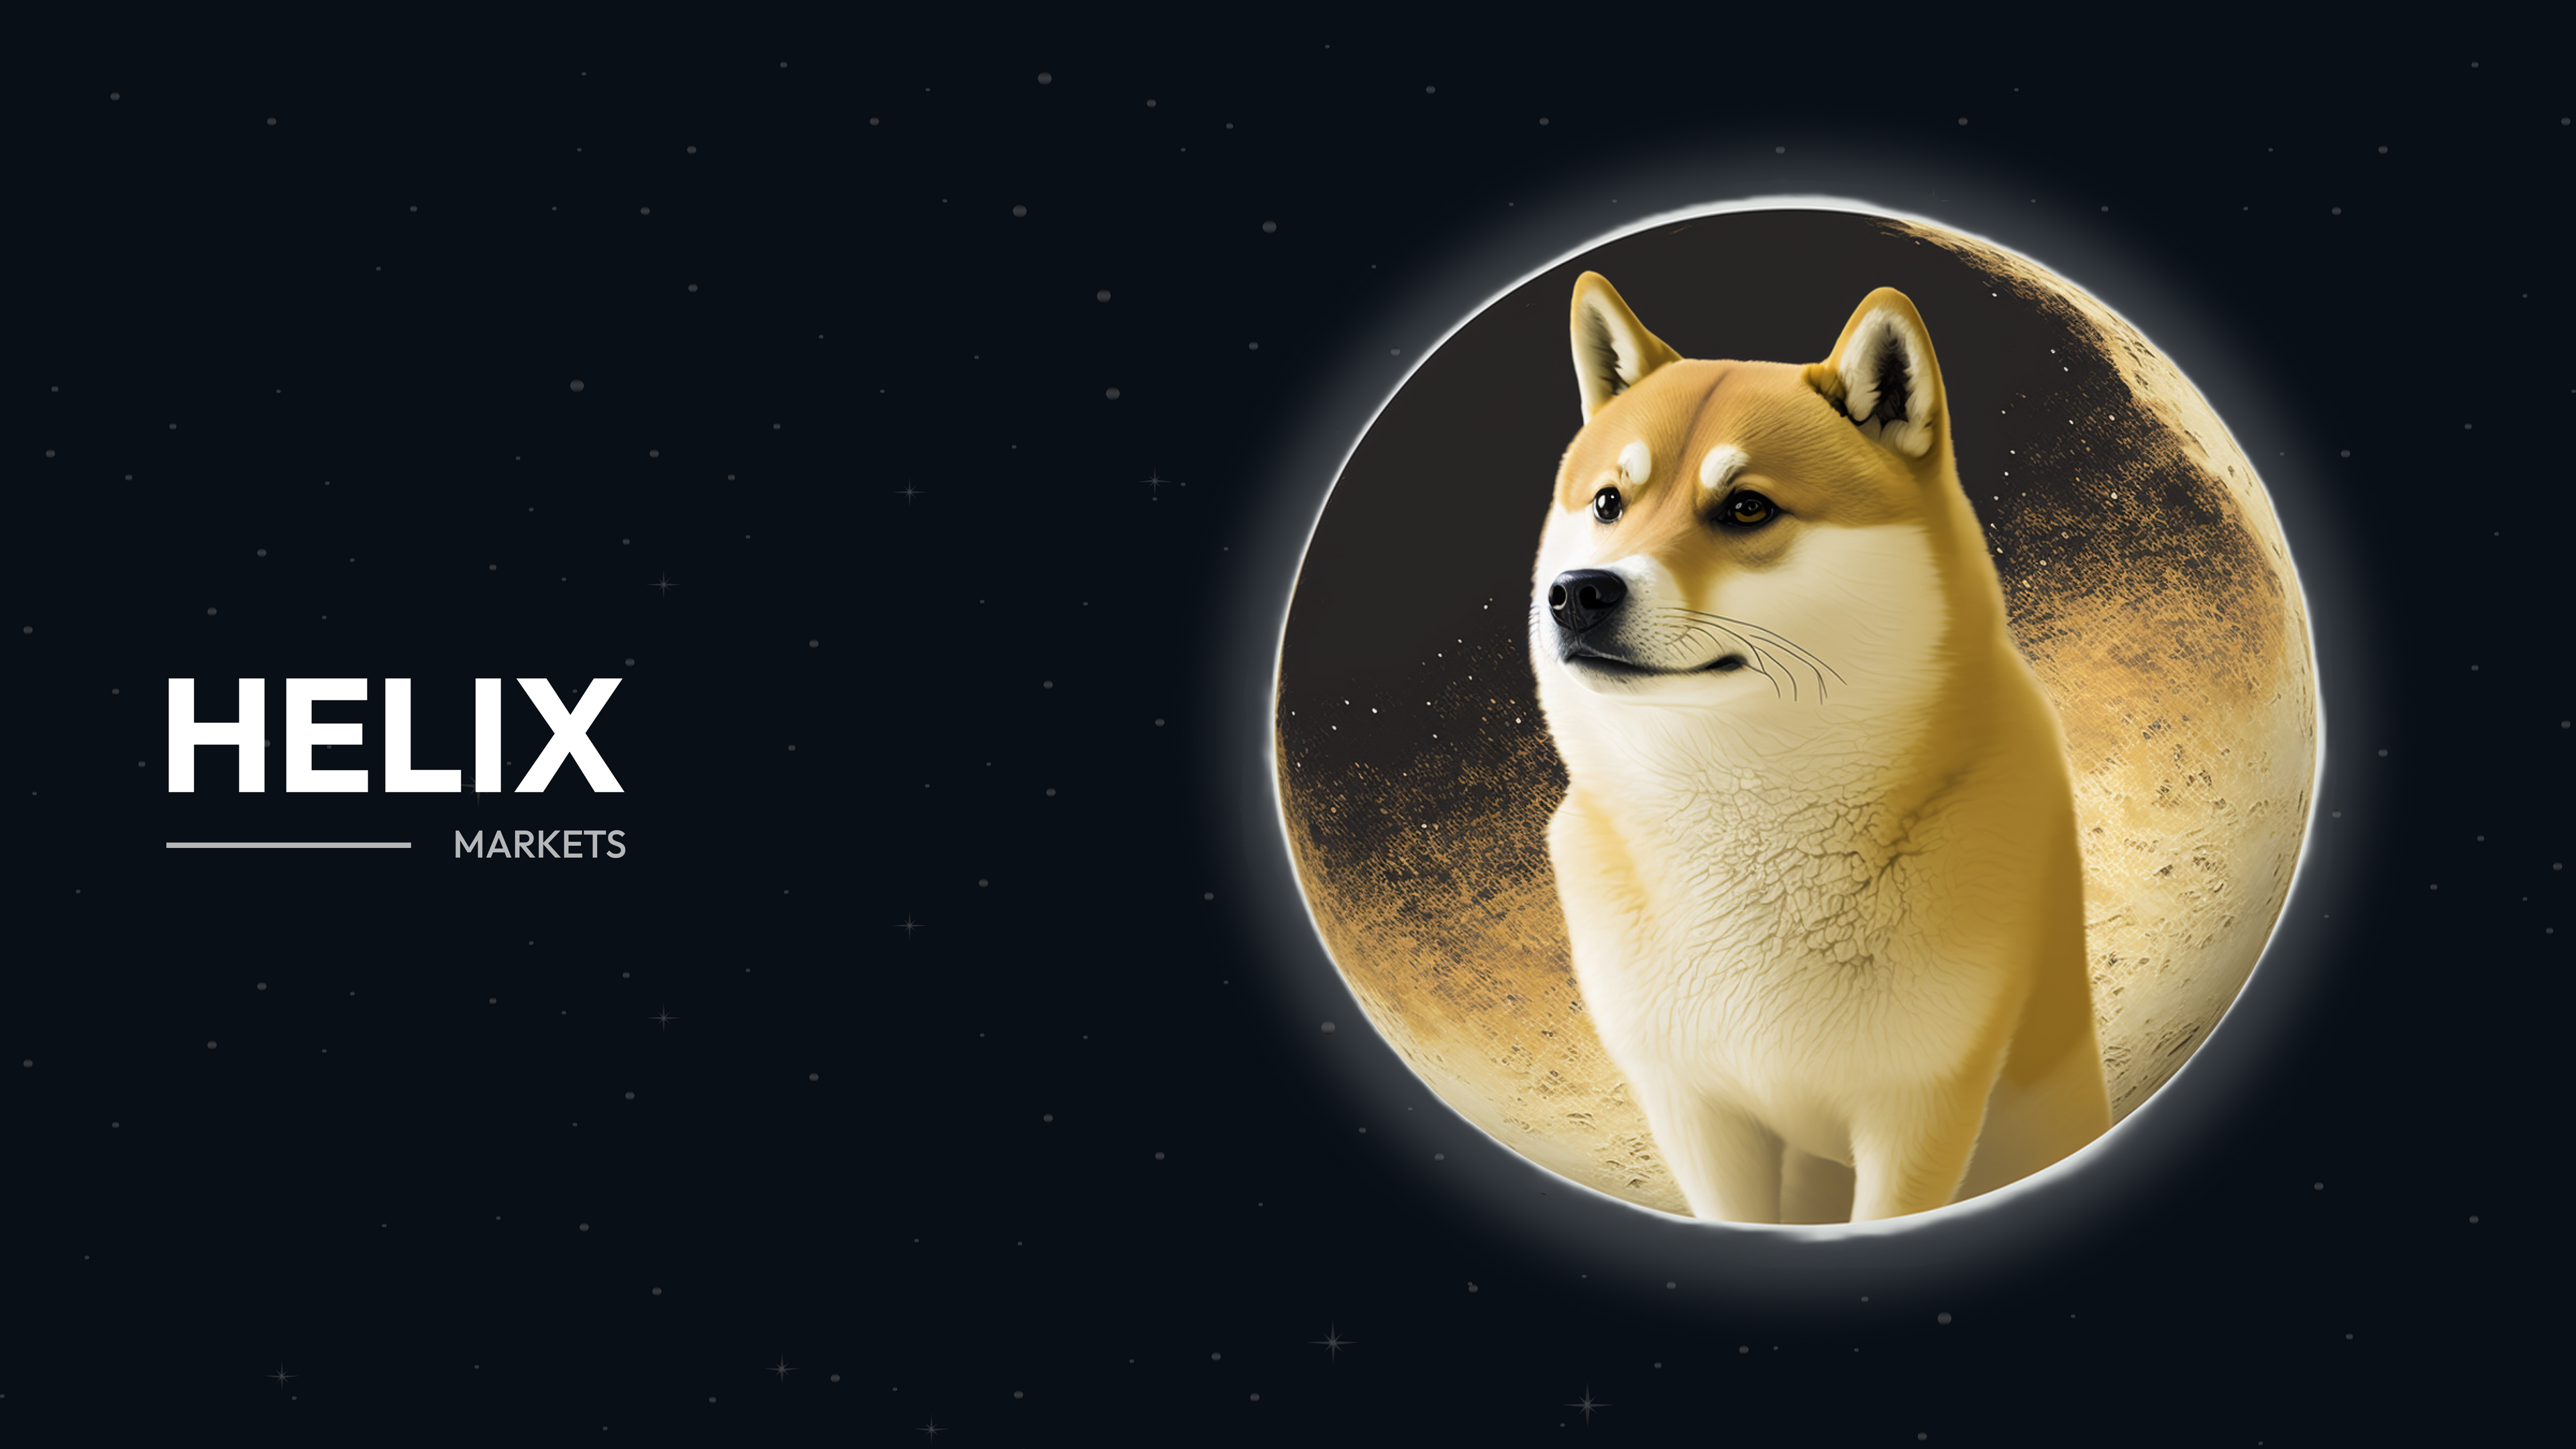 Swap DOGE to SNS1? Only on Helix!